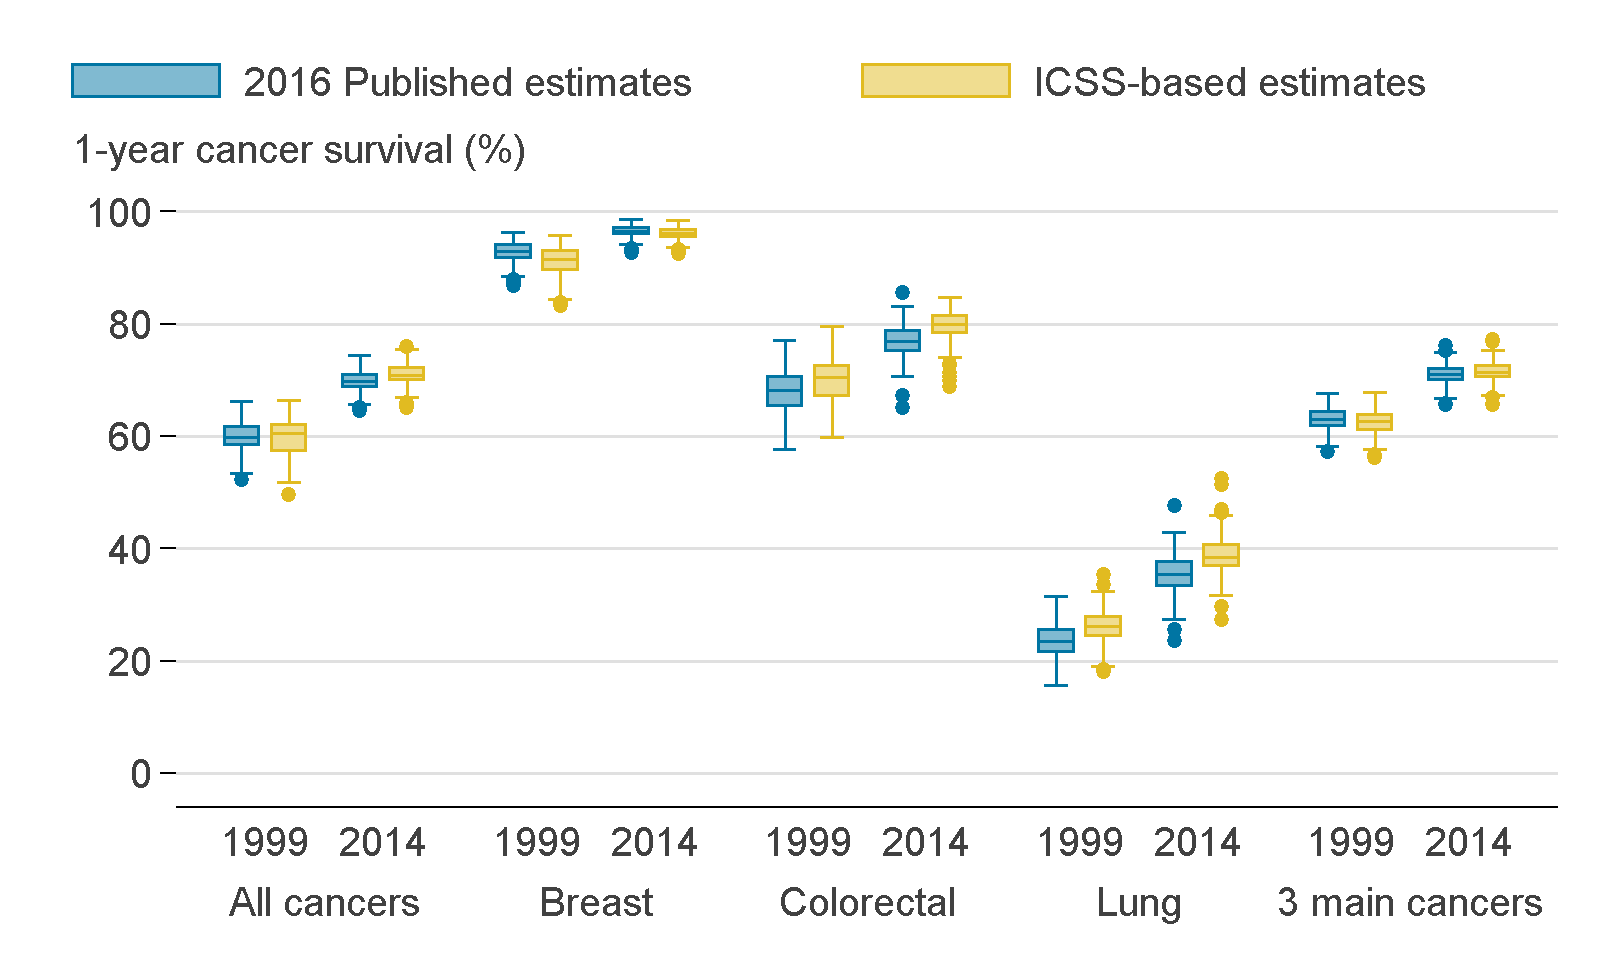 There were minor differences between the 2016 published estimates and the ICSS-based estimates for cancer types in both 1999 and 2014. 